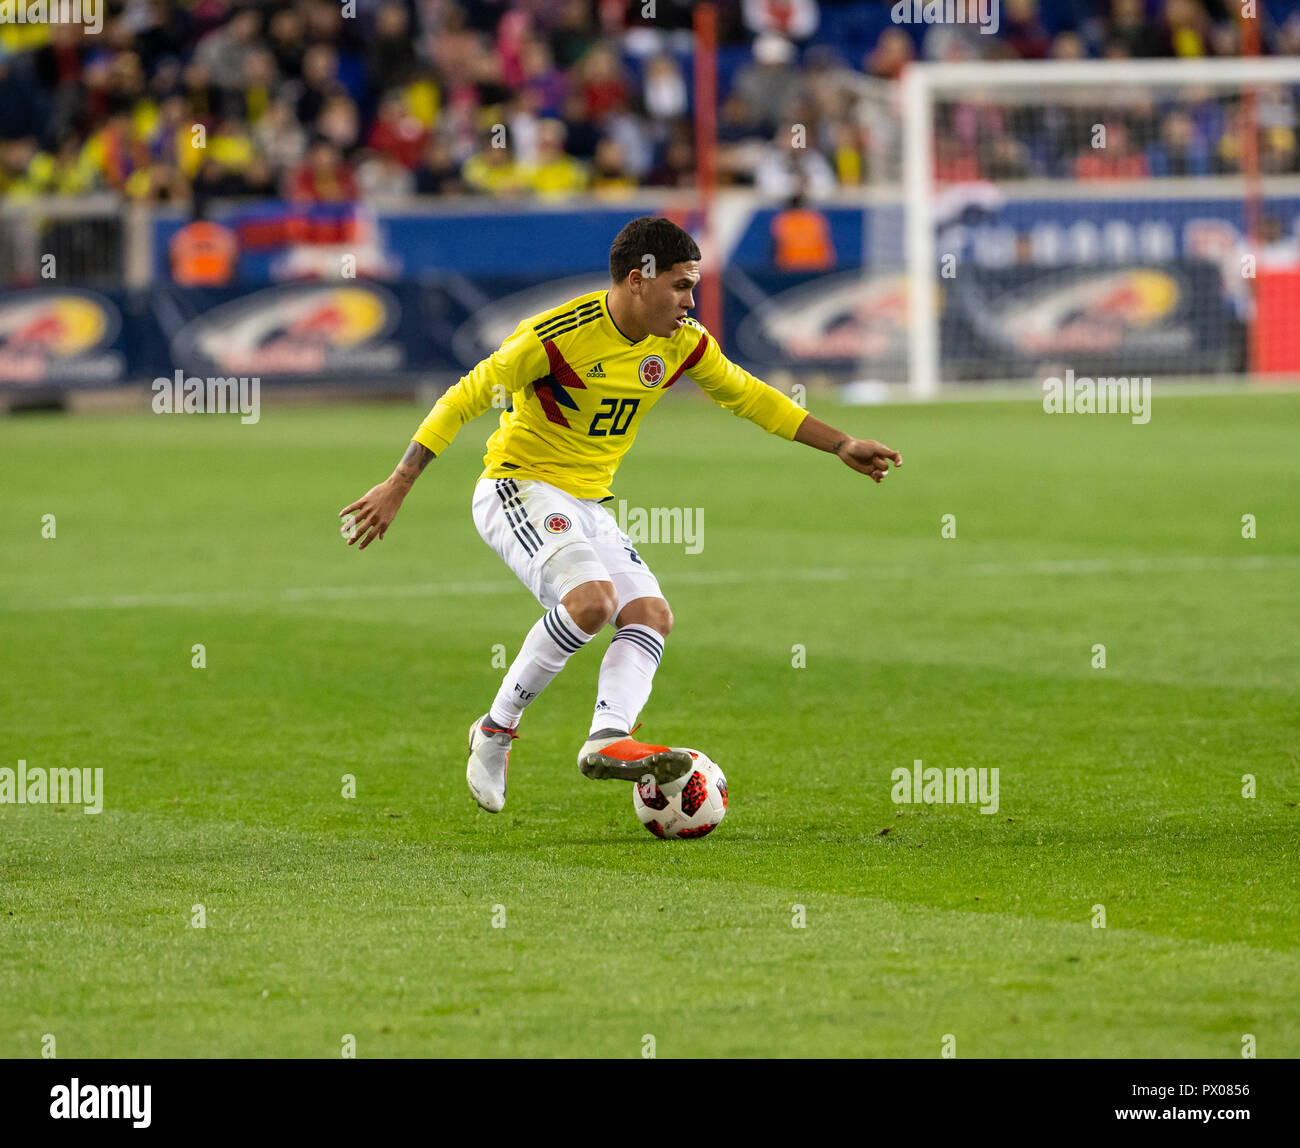 Harrison, NJ - October 16, 2018: Juan Fernando Quintero (20) of Colombia controls ball during the friendly soccer game between Costa Rica & Colombia at Red Bull Arena Colombia won 3 - 1 Stock Photo